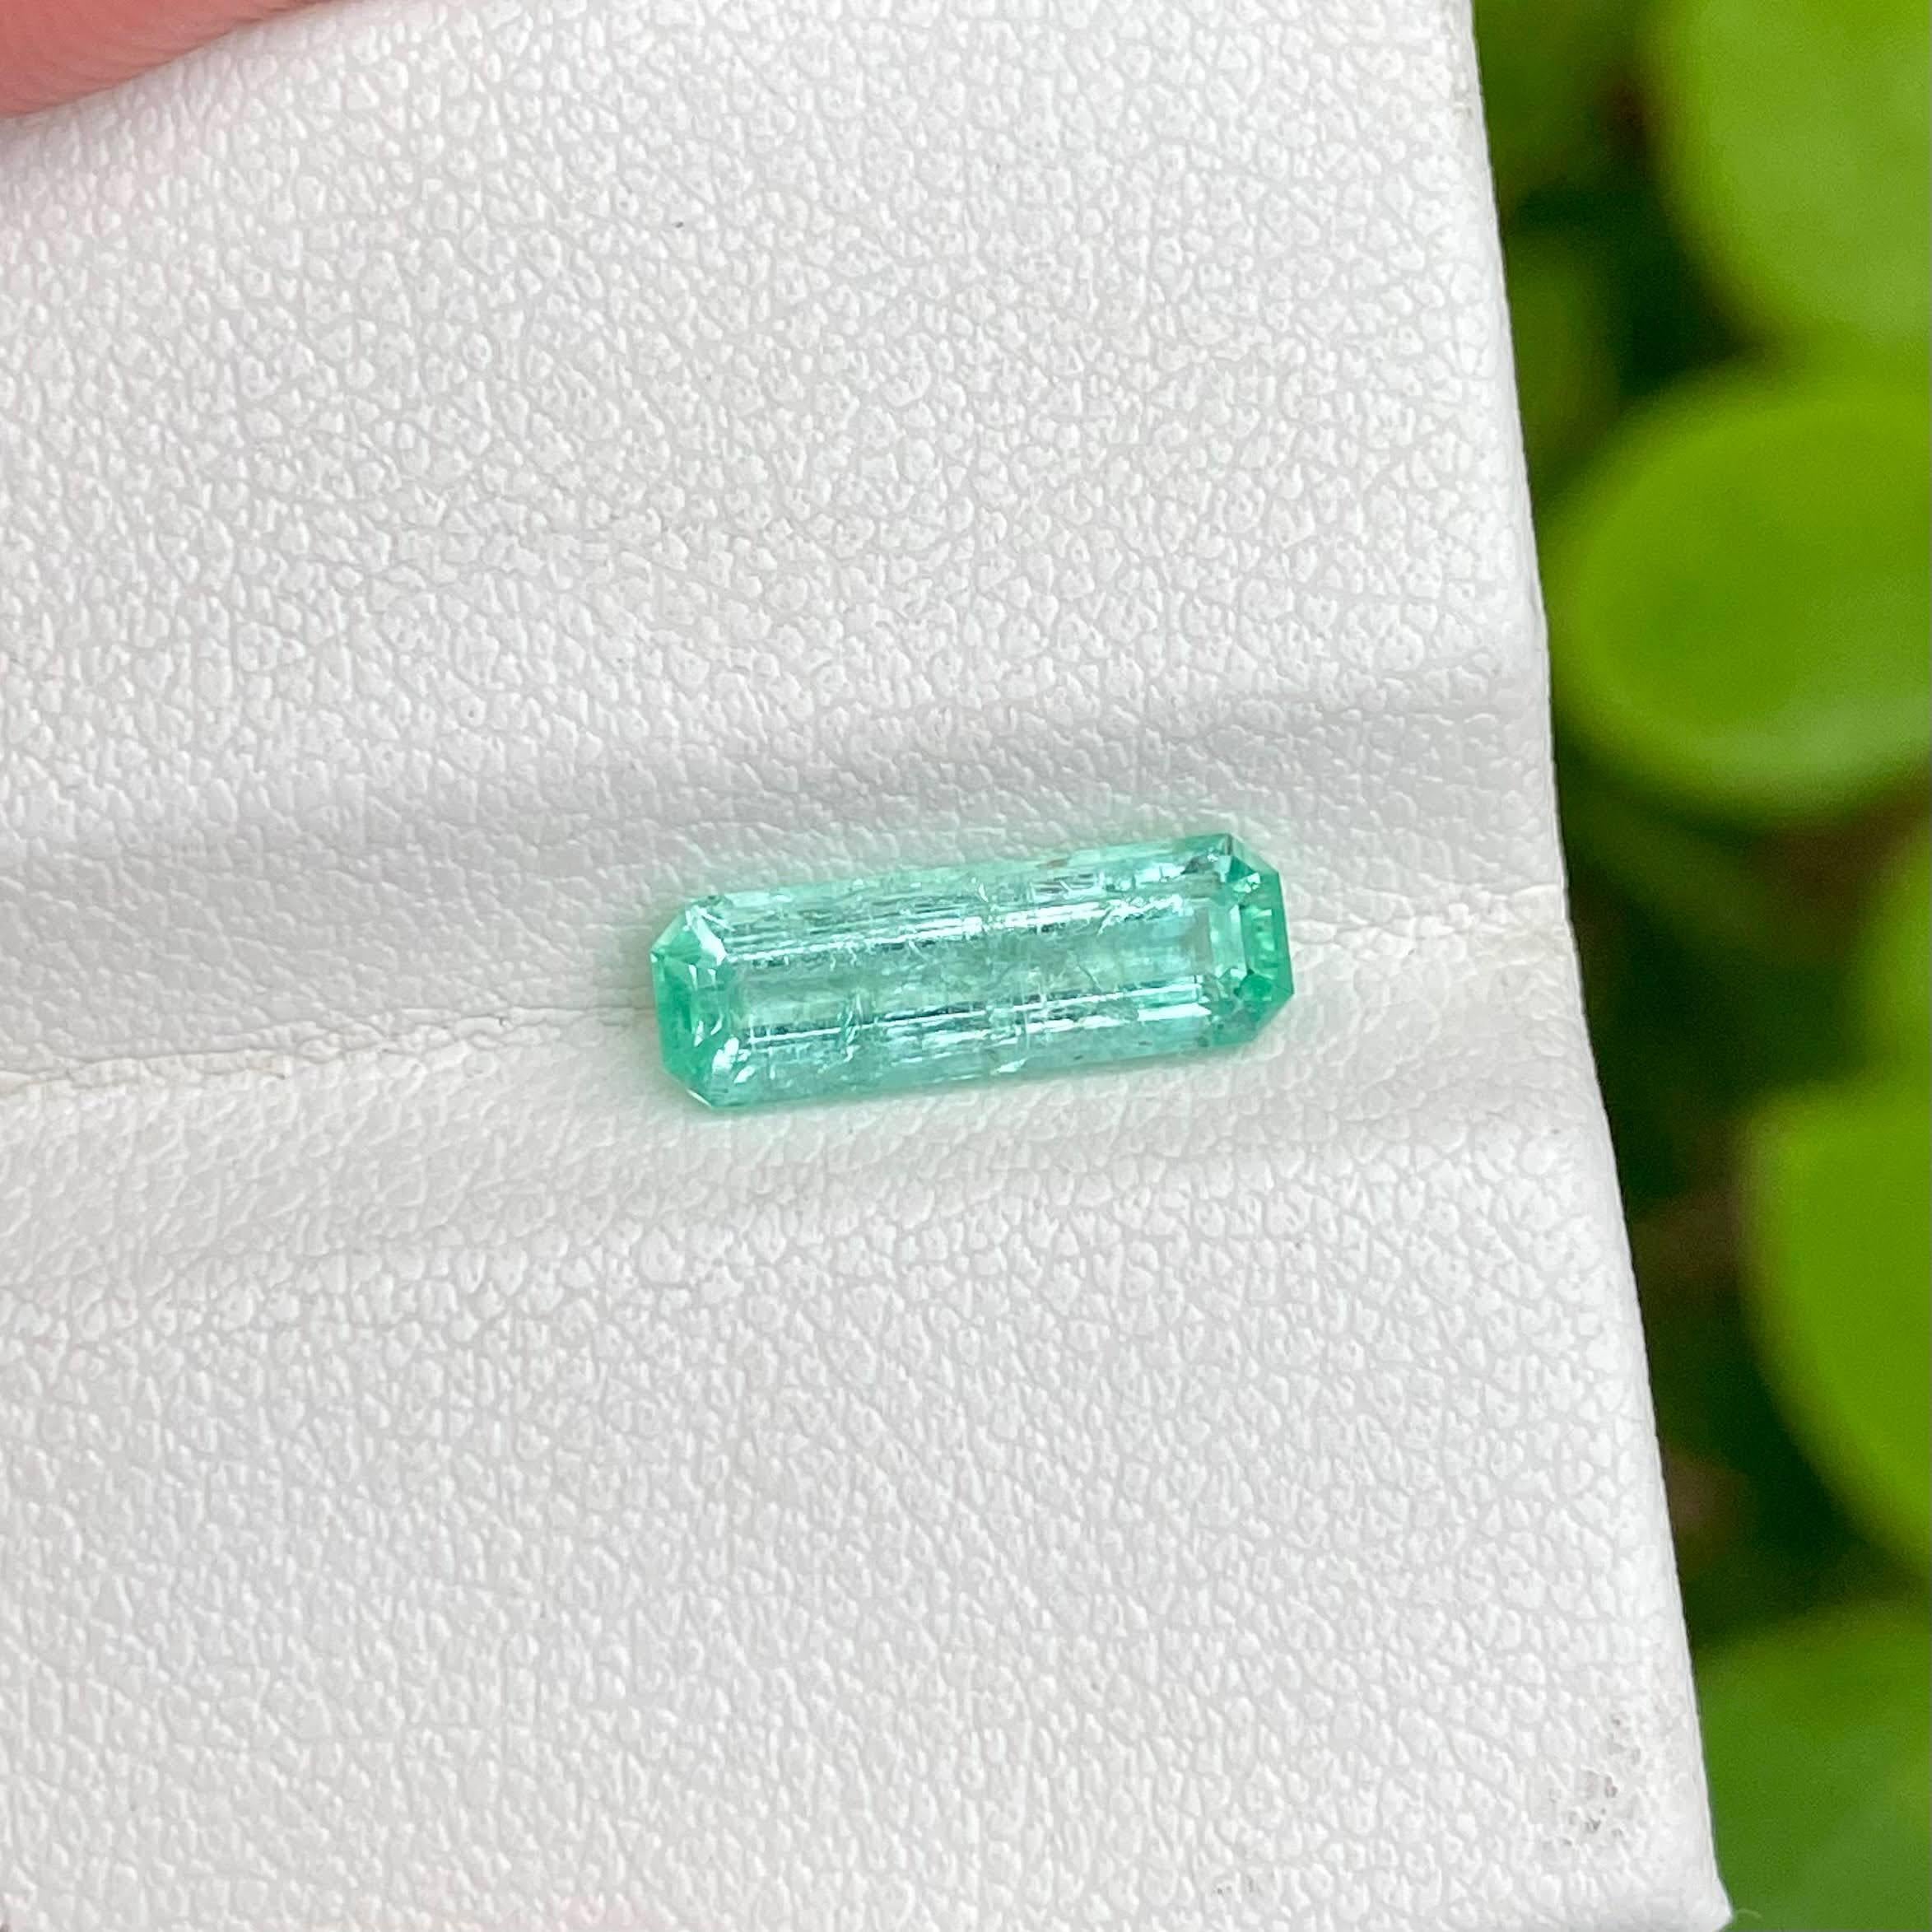 Weight 1.70 carats 
Dimensions 12.8x4.22x3.70 mm
Treatment none 
Origin Afghanistan 
Clarity included 
Shape octagon 
Cut emerald 



This stunning 1.70 carat emerald stone, meticulously cut into a classic emerald shape, emanates a rich and vibrant